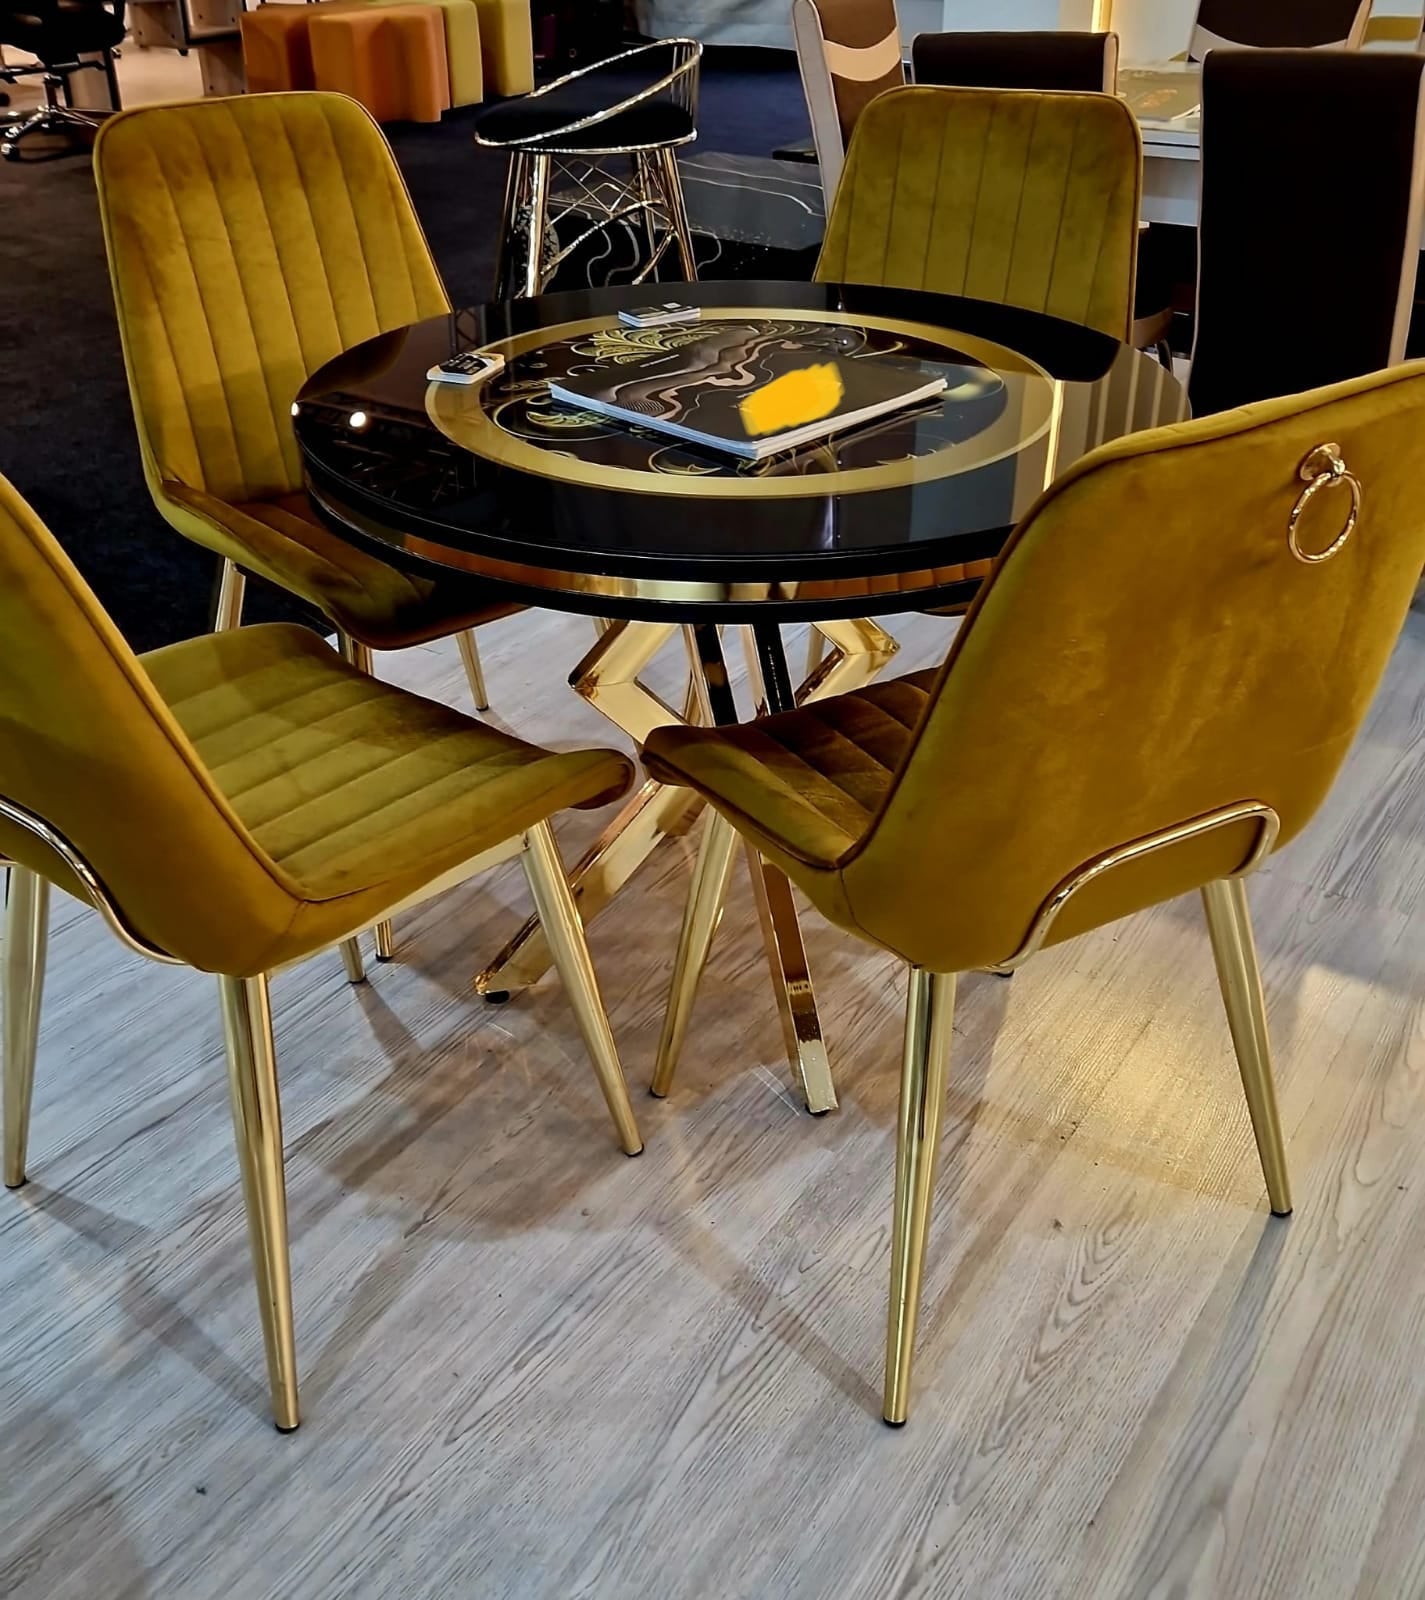 G-ES060 Mustard Yellow Oval Glass Dining Set